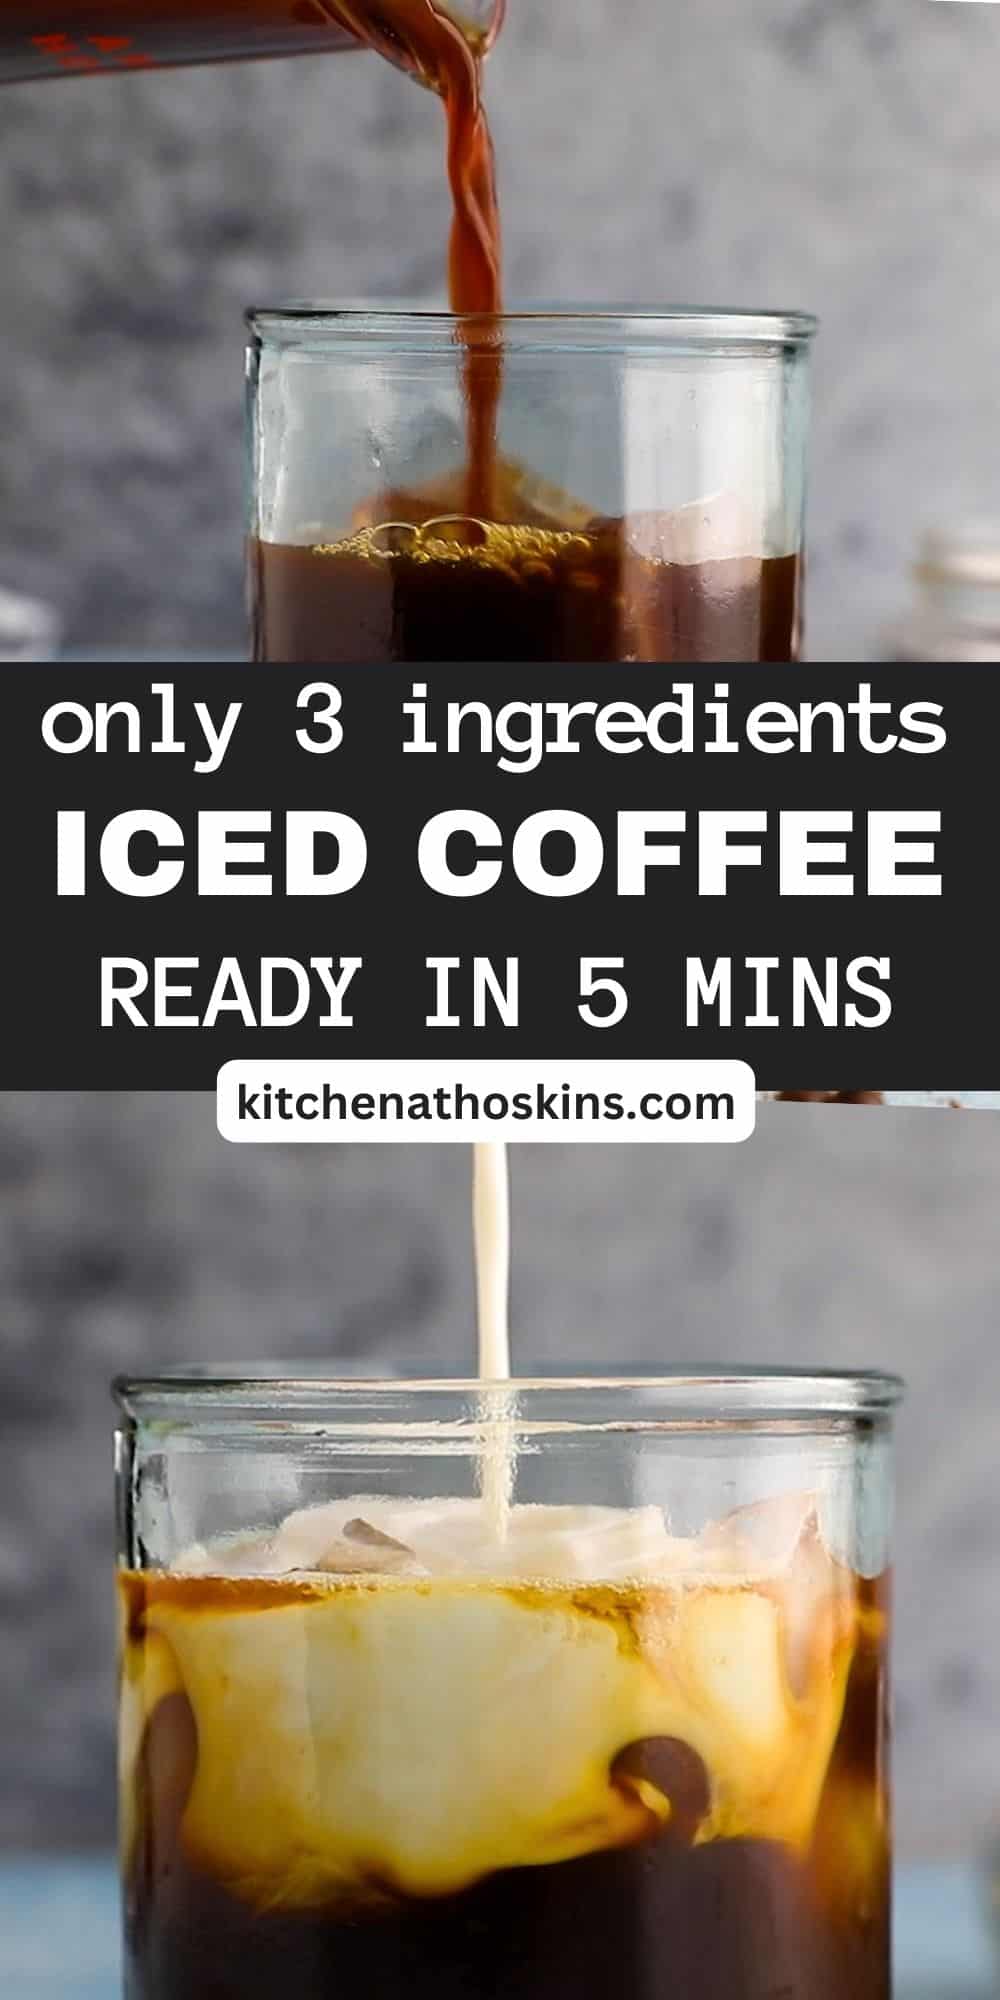 How to make Iced Coffee | Kitchen At Hoskins